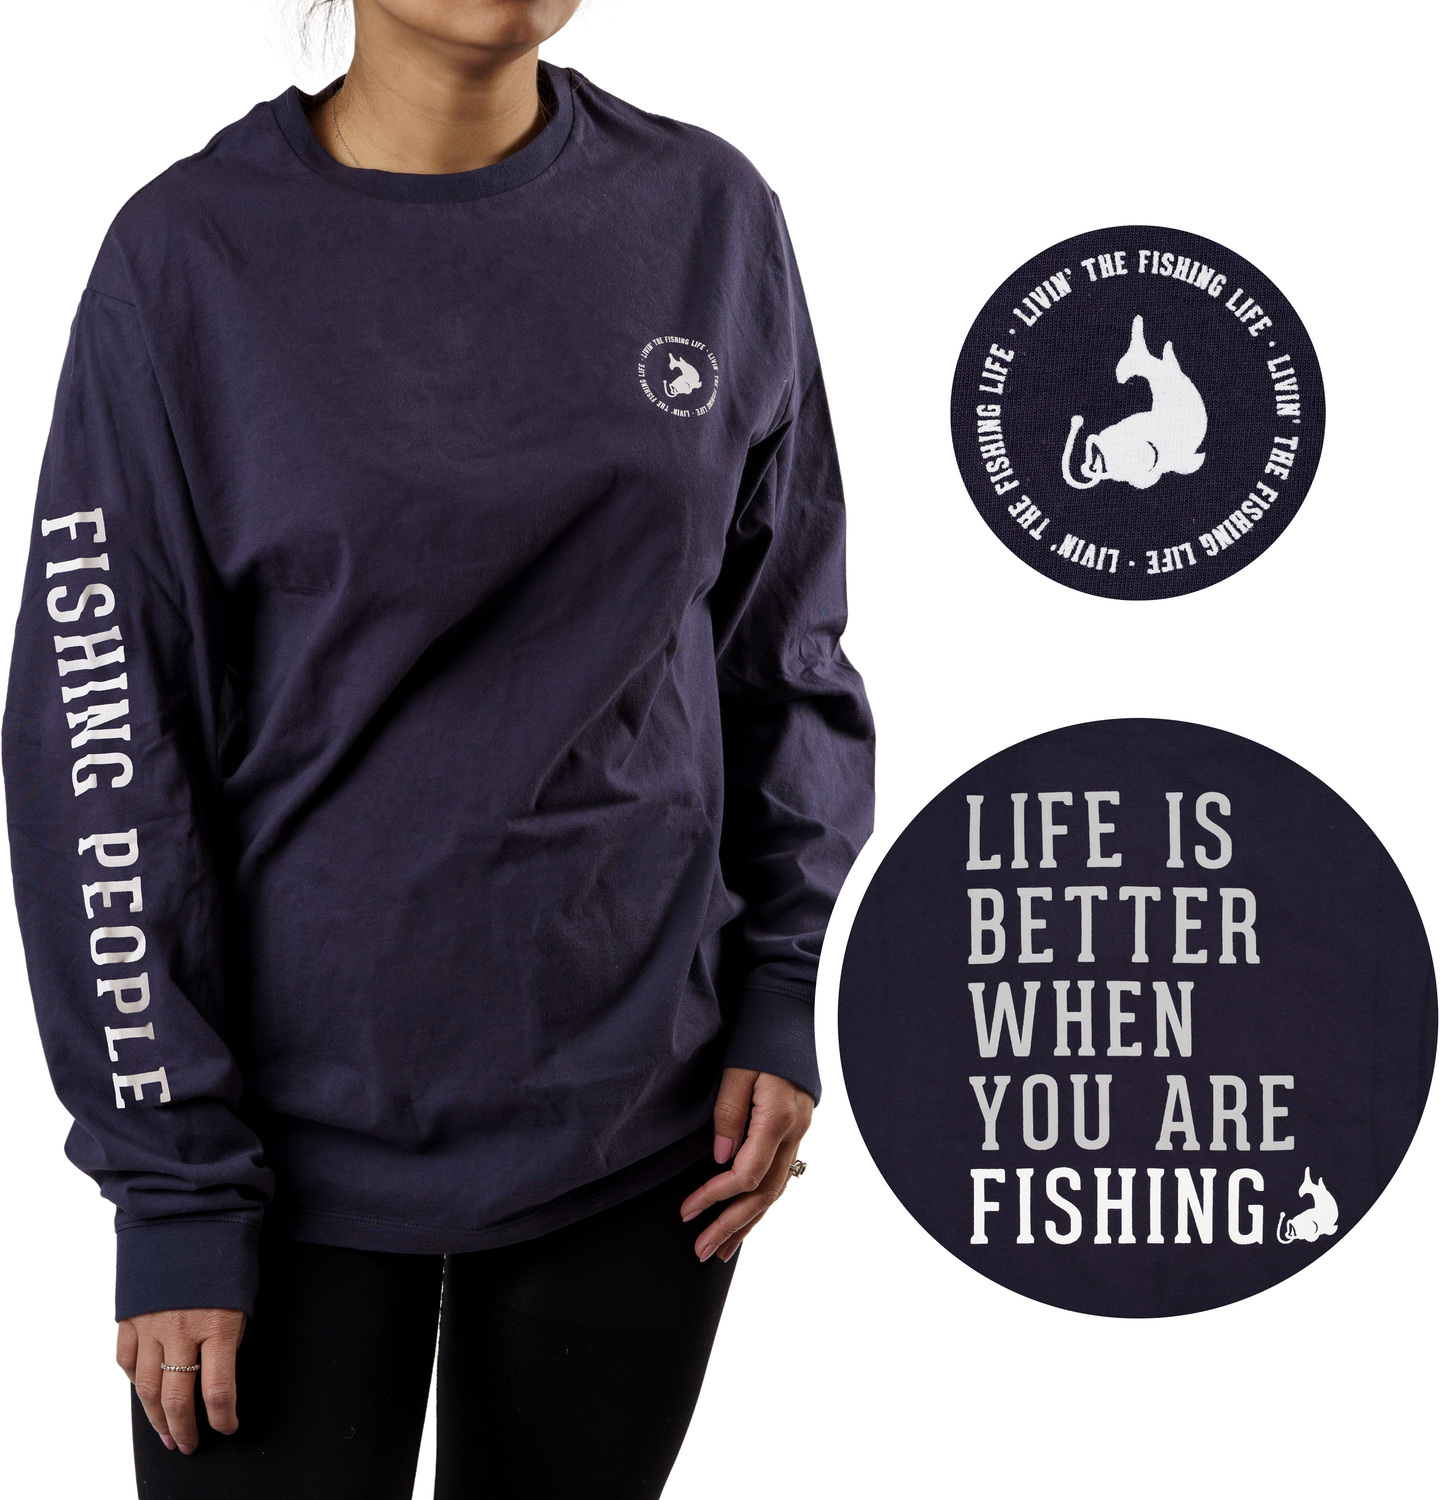 Fishing People by We People - Fishing People - Small Navy Unisex Long Sleeve T-Shirt